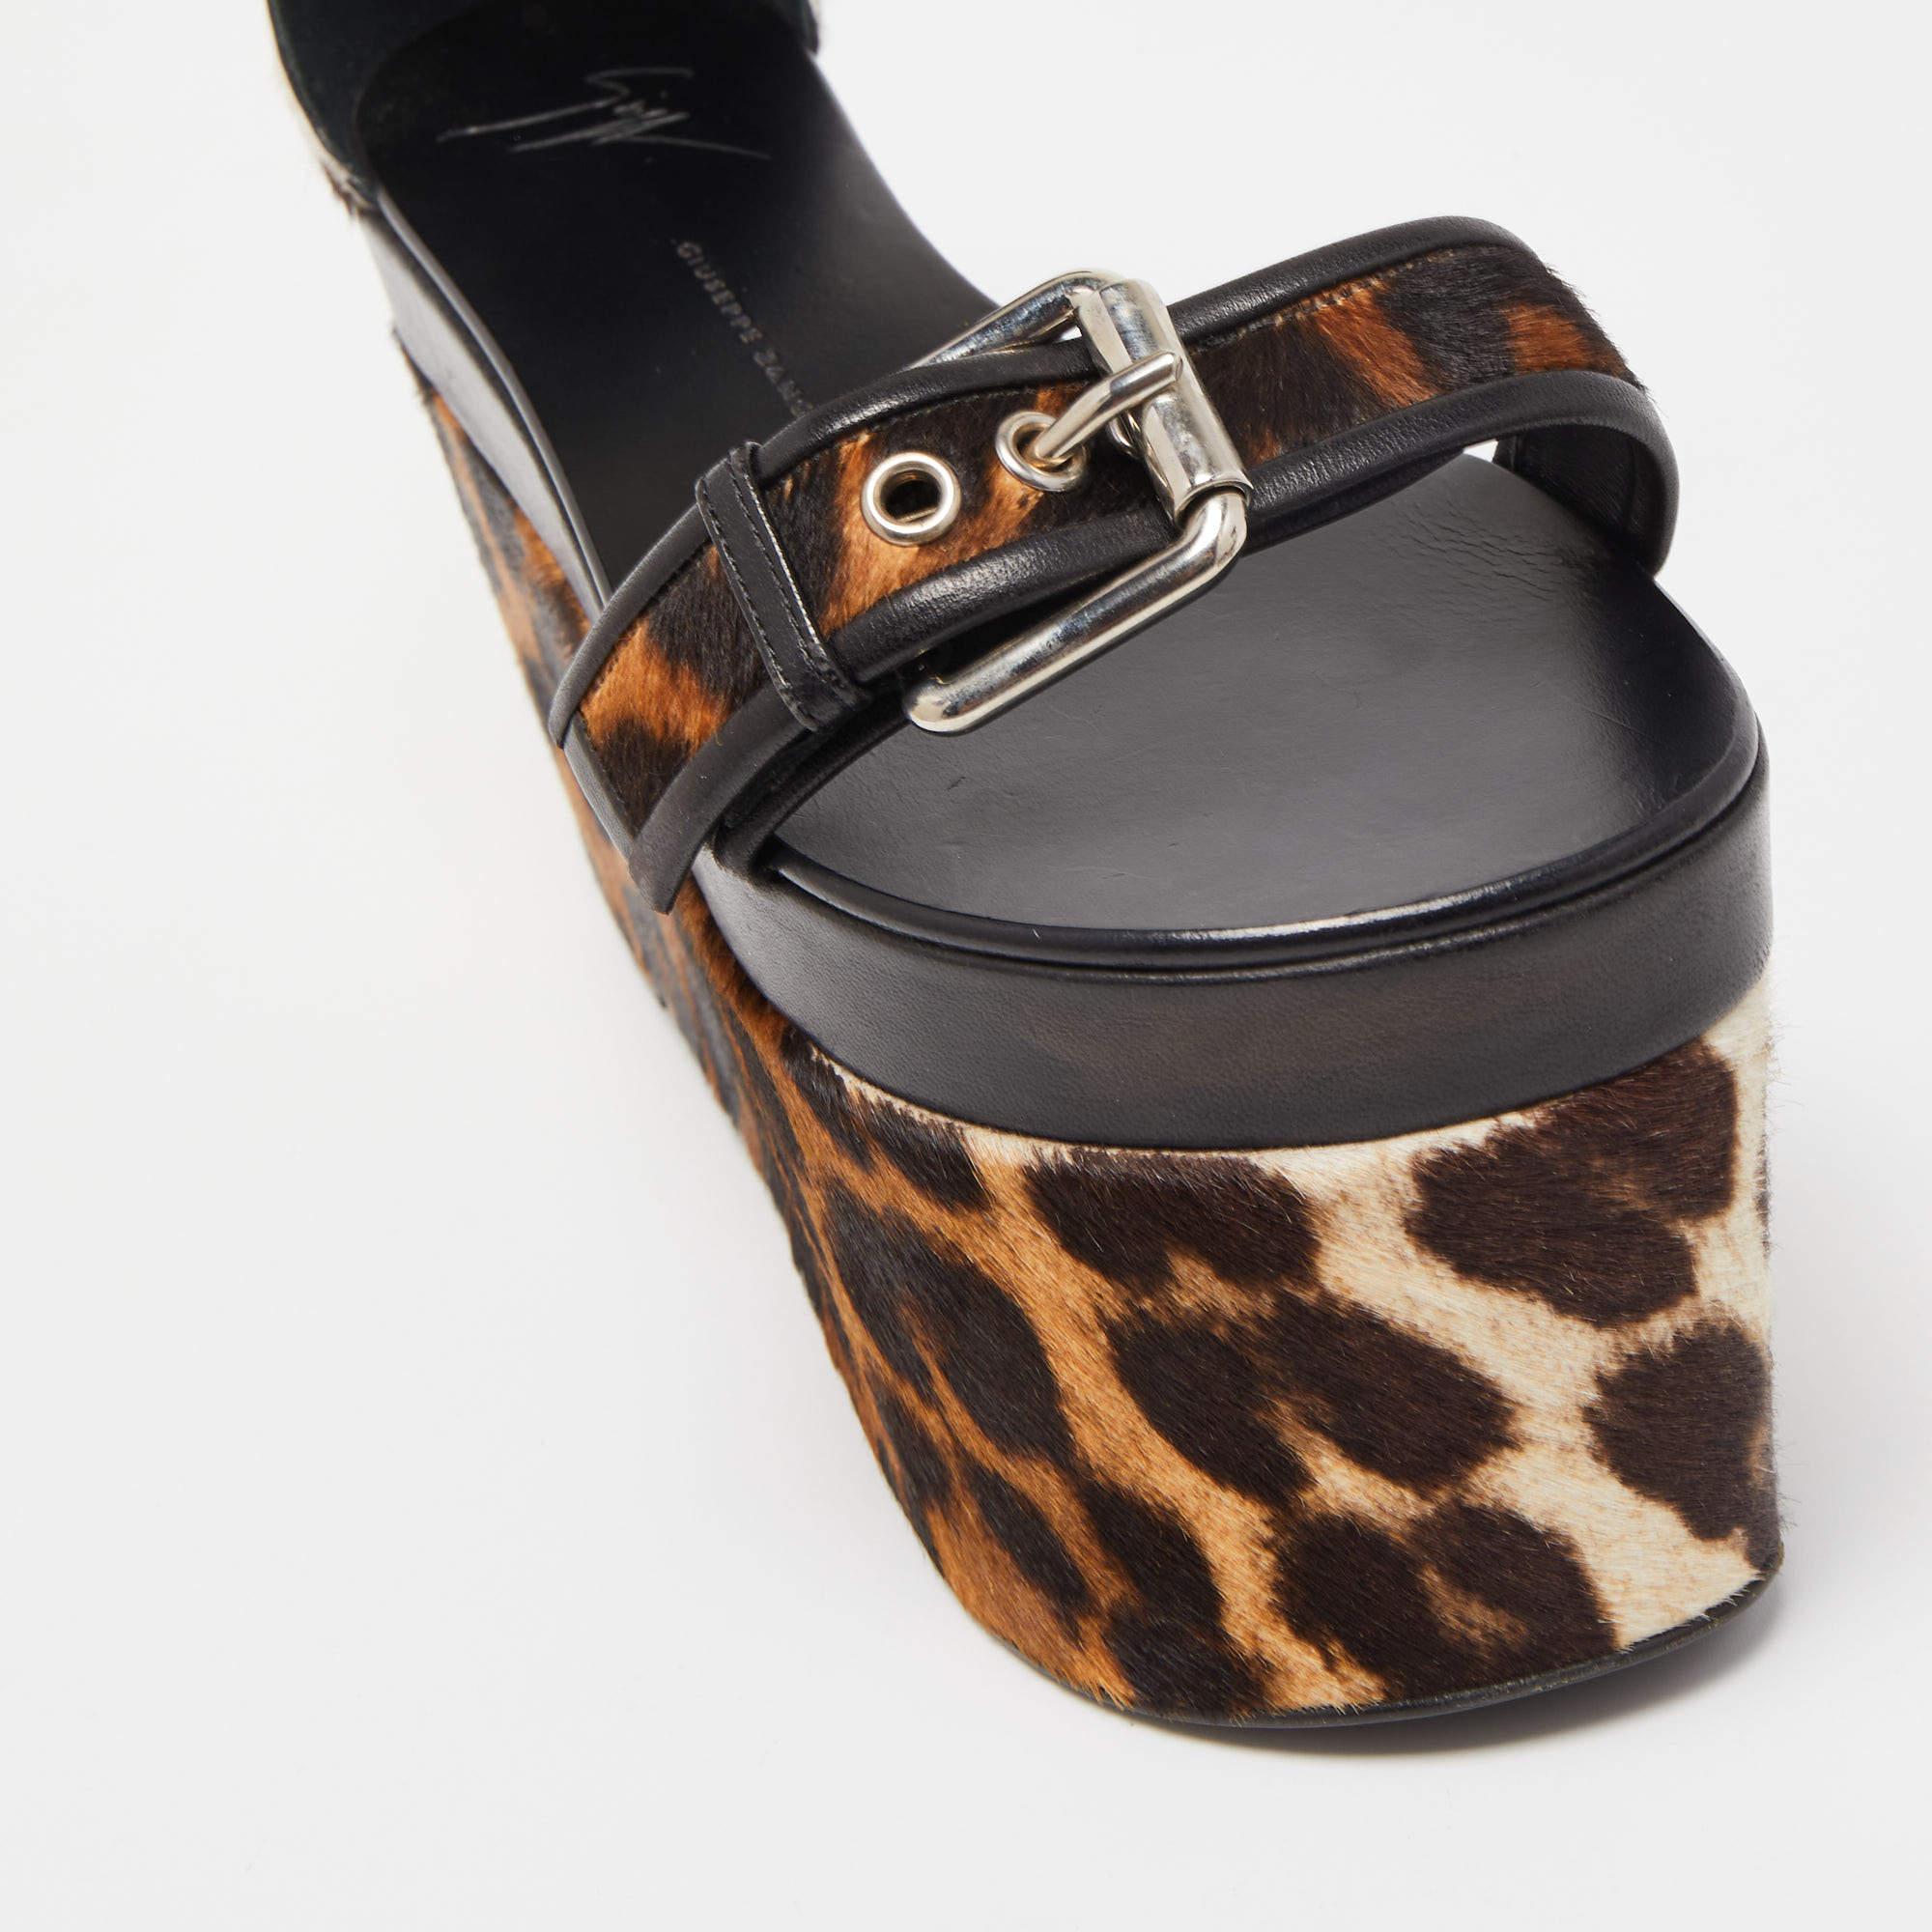 Giuseppe Zanotti Brown Leather and Calf Hair Leopard Ankle Strap Platform Sandal In Excellent Condition For Sale In Dubai, Al Qouz 2